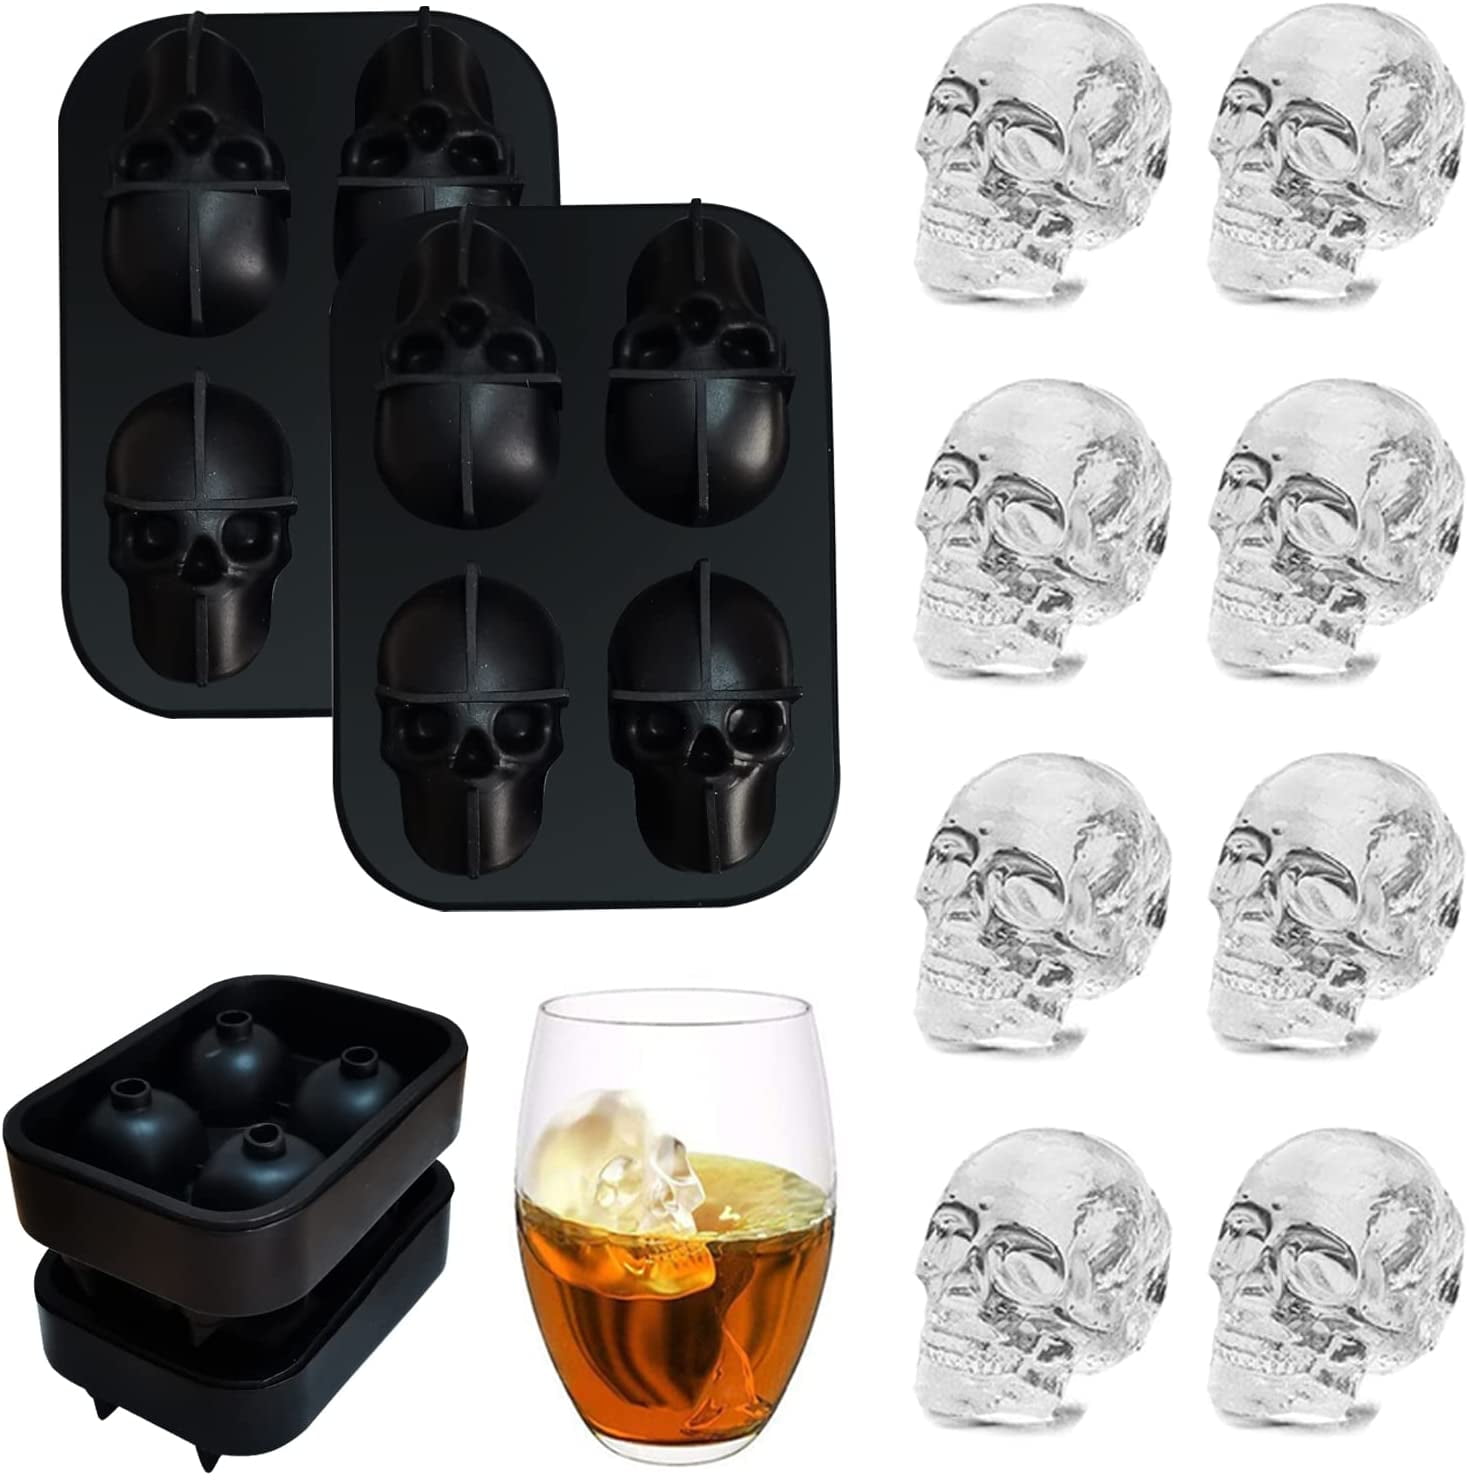 4-Grid Ice Mold 3D Skeleton Skull Silicone Ice Chocolate Cake Candy Mould Bones 